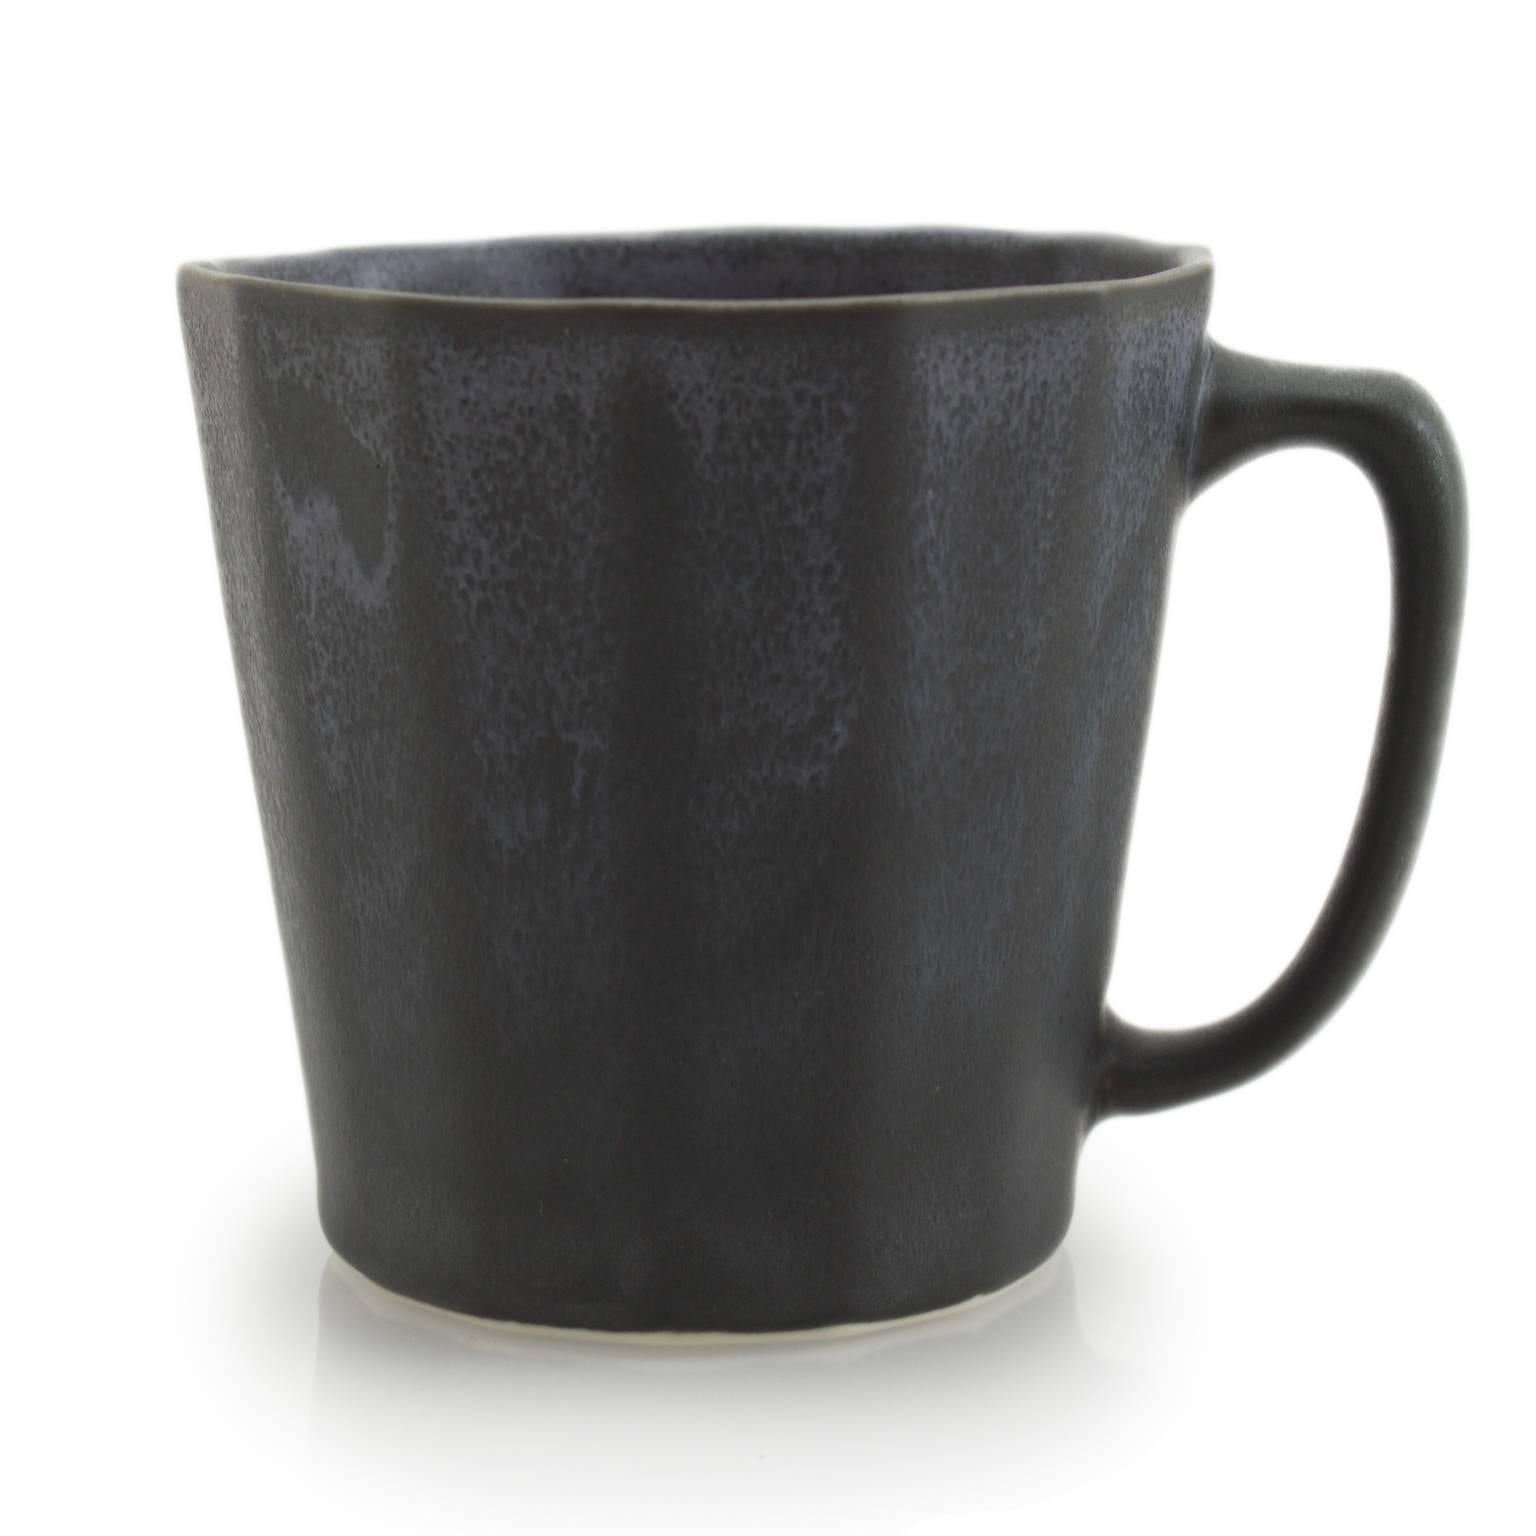 Matte black Monday Mug, set of four
-That mug you can't put down and is always there when you wake up - a special collaboration with Shannon Tovey and Nick Moen. The Monday Mug is the coffee or tea lovers dream. The Monday Mug is a unique mug design